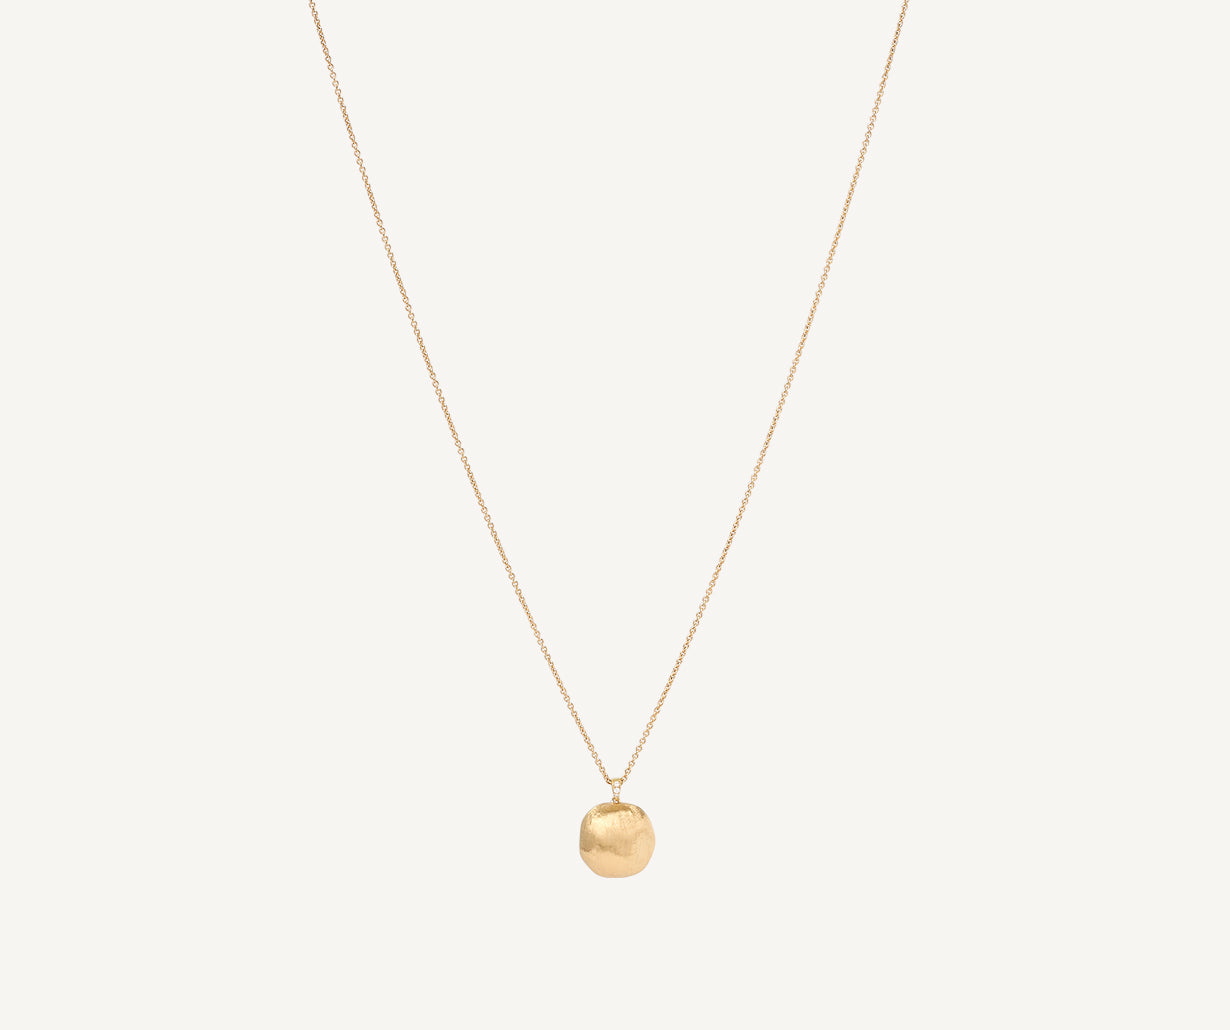 18k yellow gold ball Africa necklace with diamonds long version by Marco Bicego